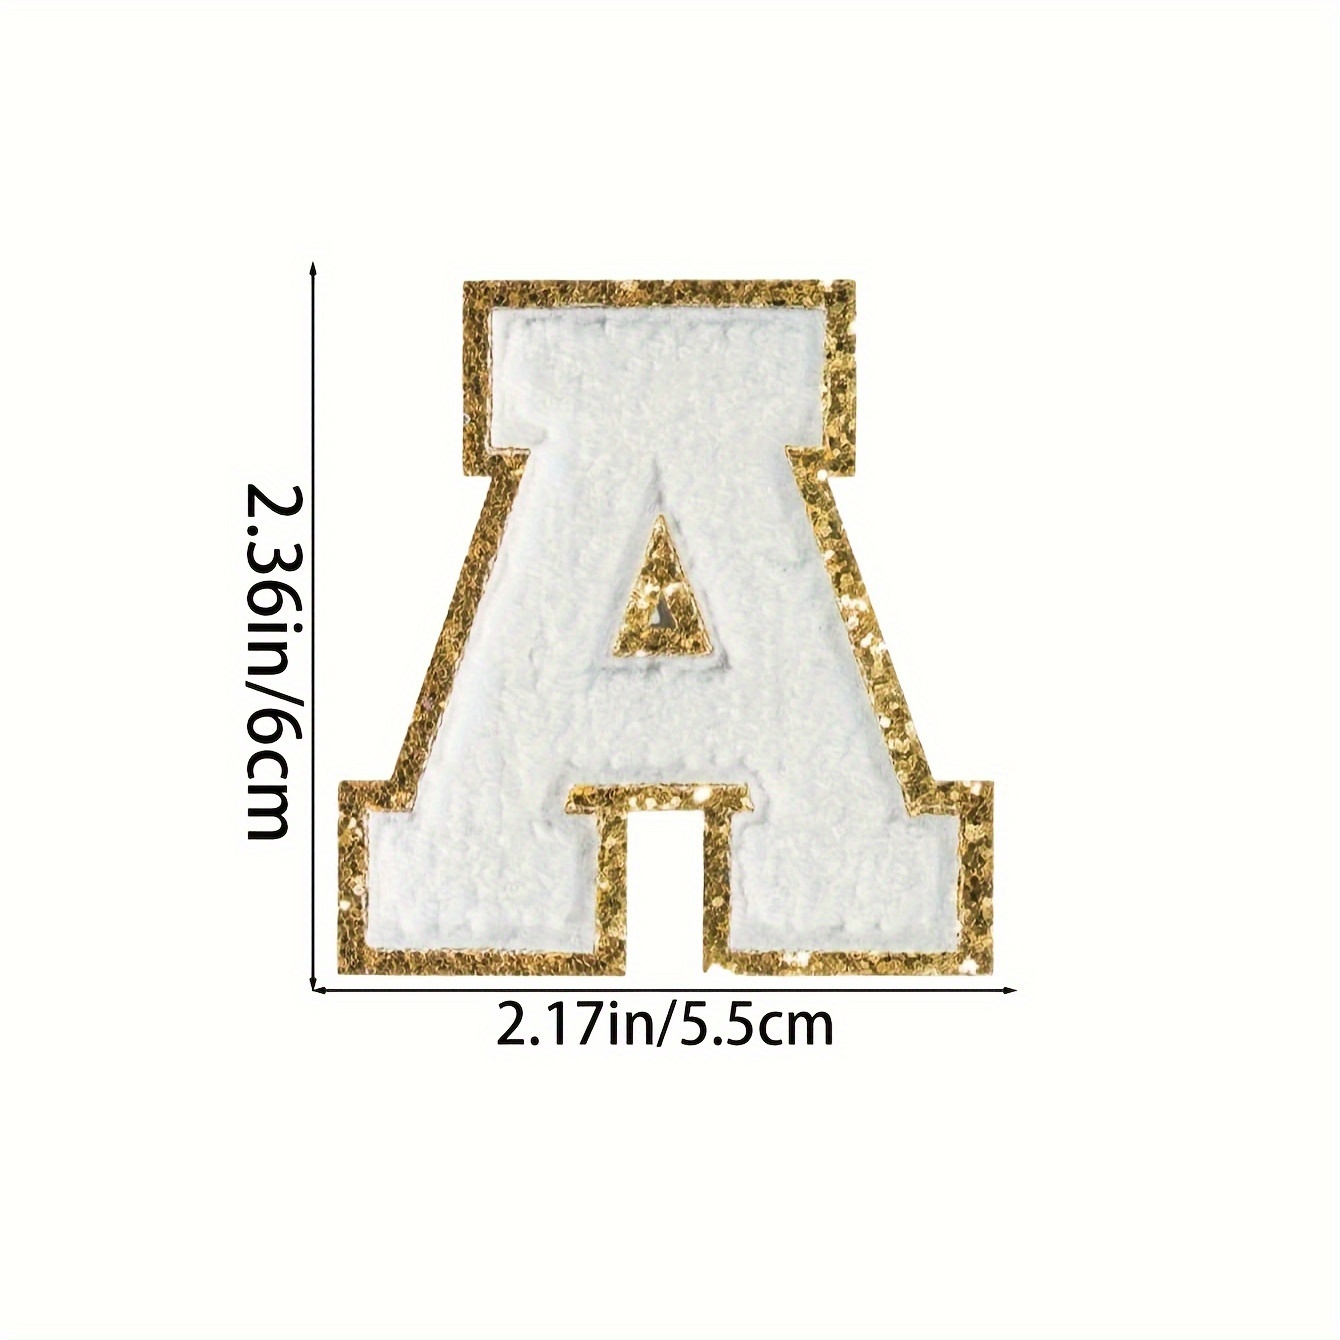  Xummero 160 Pcs Chenille Letter Patches Iron On Patch for  Clothes Clothing Jeans Fabric Repair, Letter Patch Iron On Varsity Letters  Patches for Shirt Jacket Preppy Alphabet Patches : Arts, Crafts